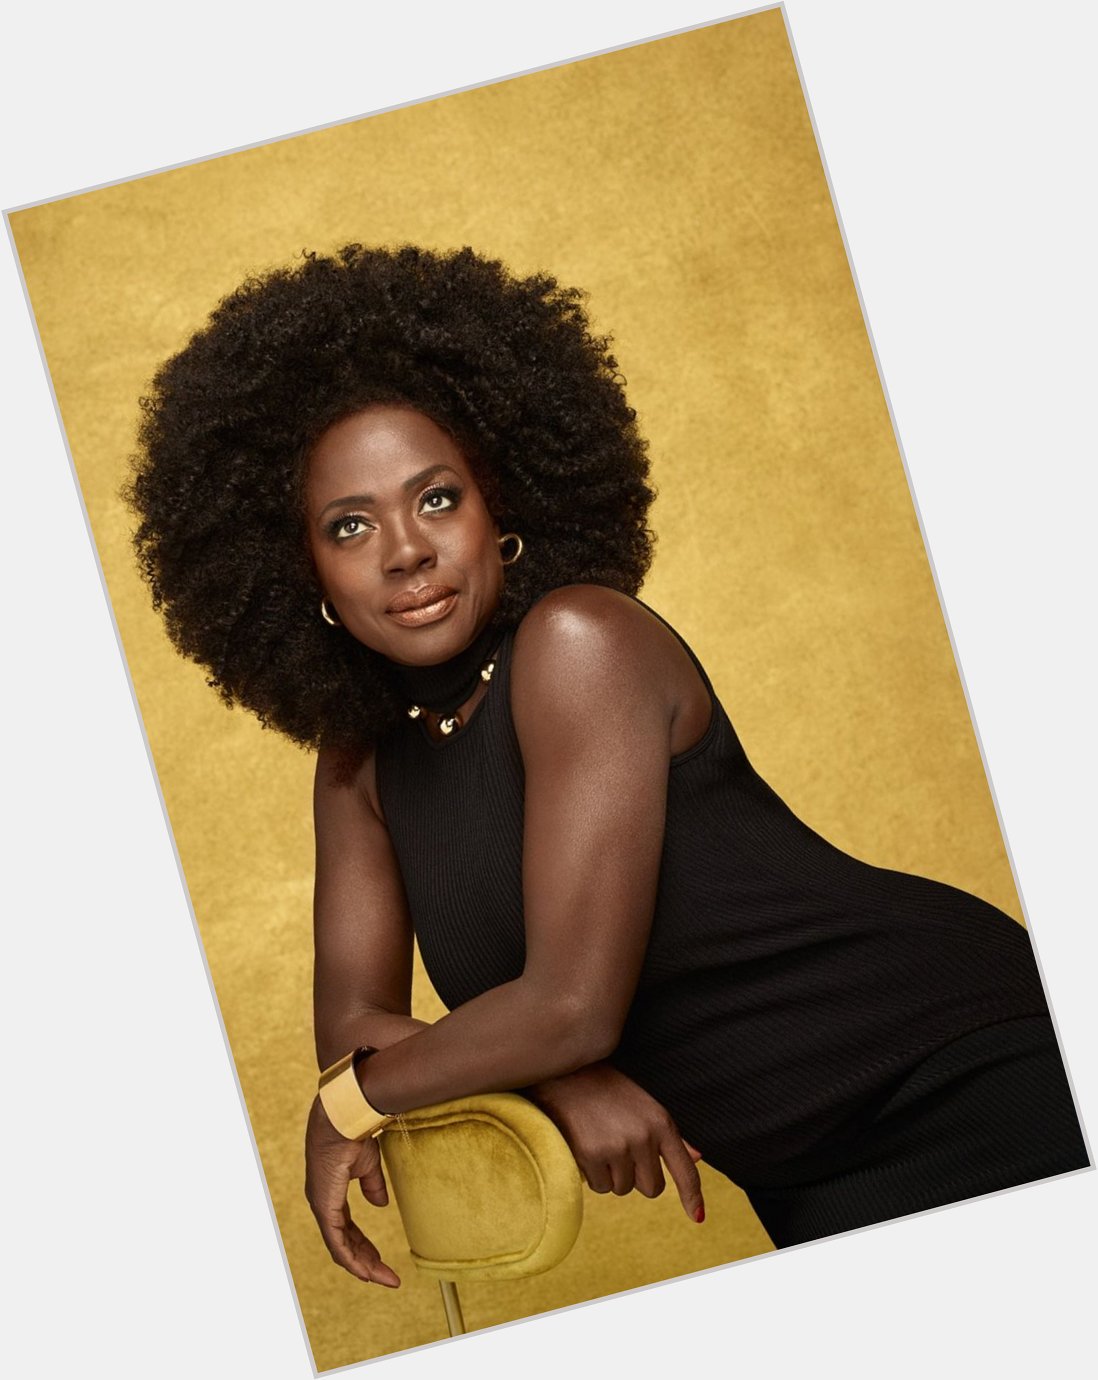 
Happy Birthday goes out to Viola Davis She turns 57 today 